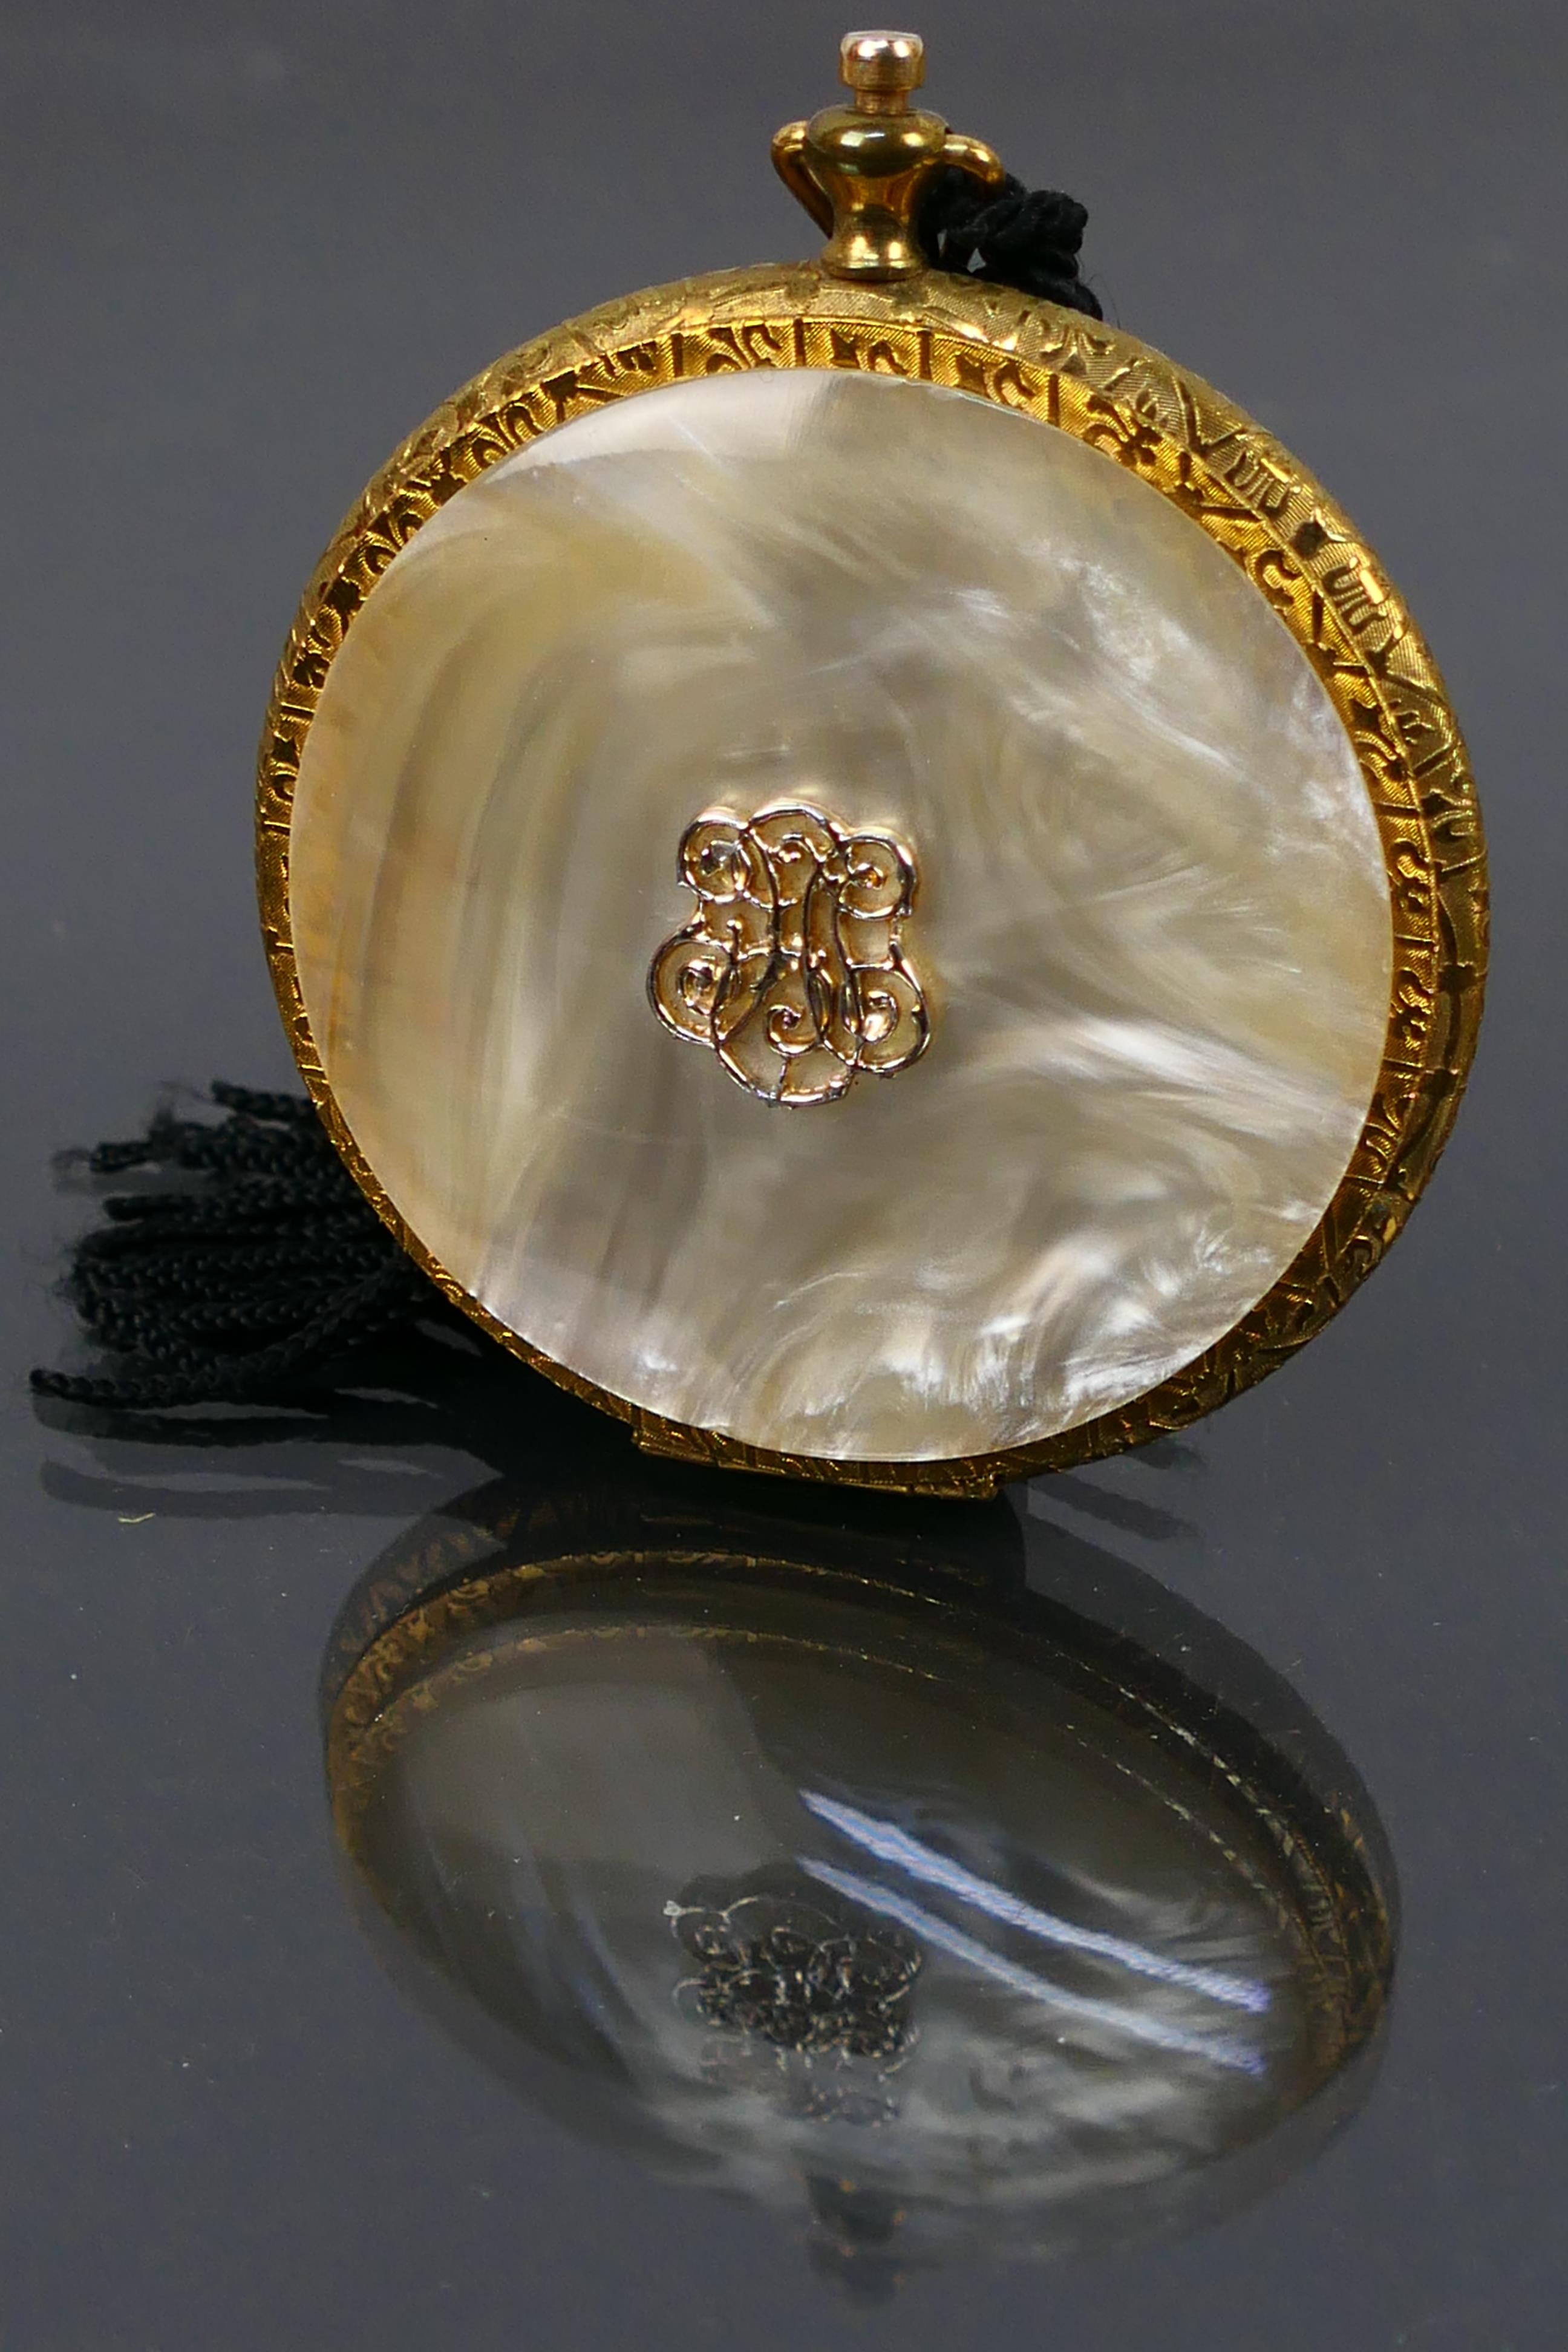 Estee Lauder - Revlon - A vintage Estee Lauder Honey Glow compact with a mother of pearl style - Image 2 of 9